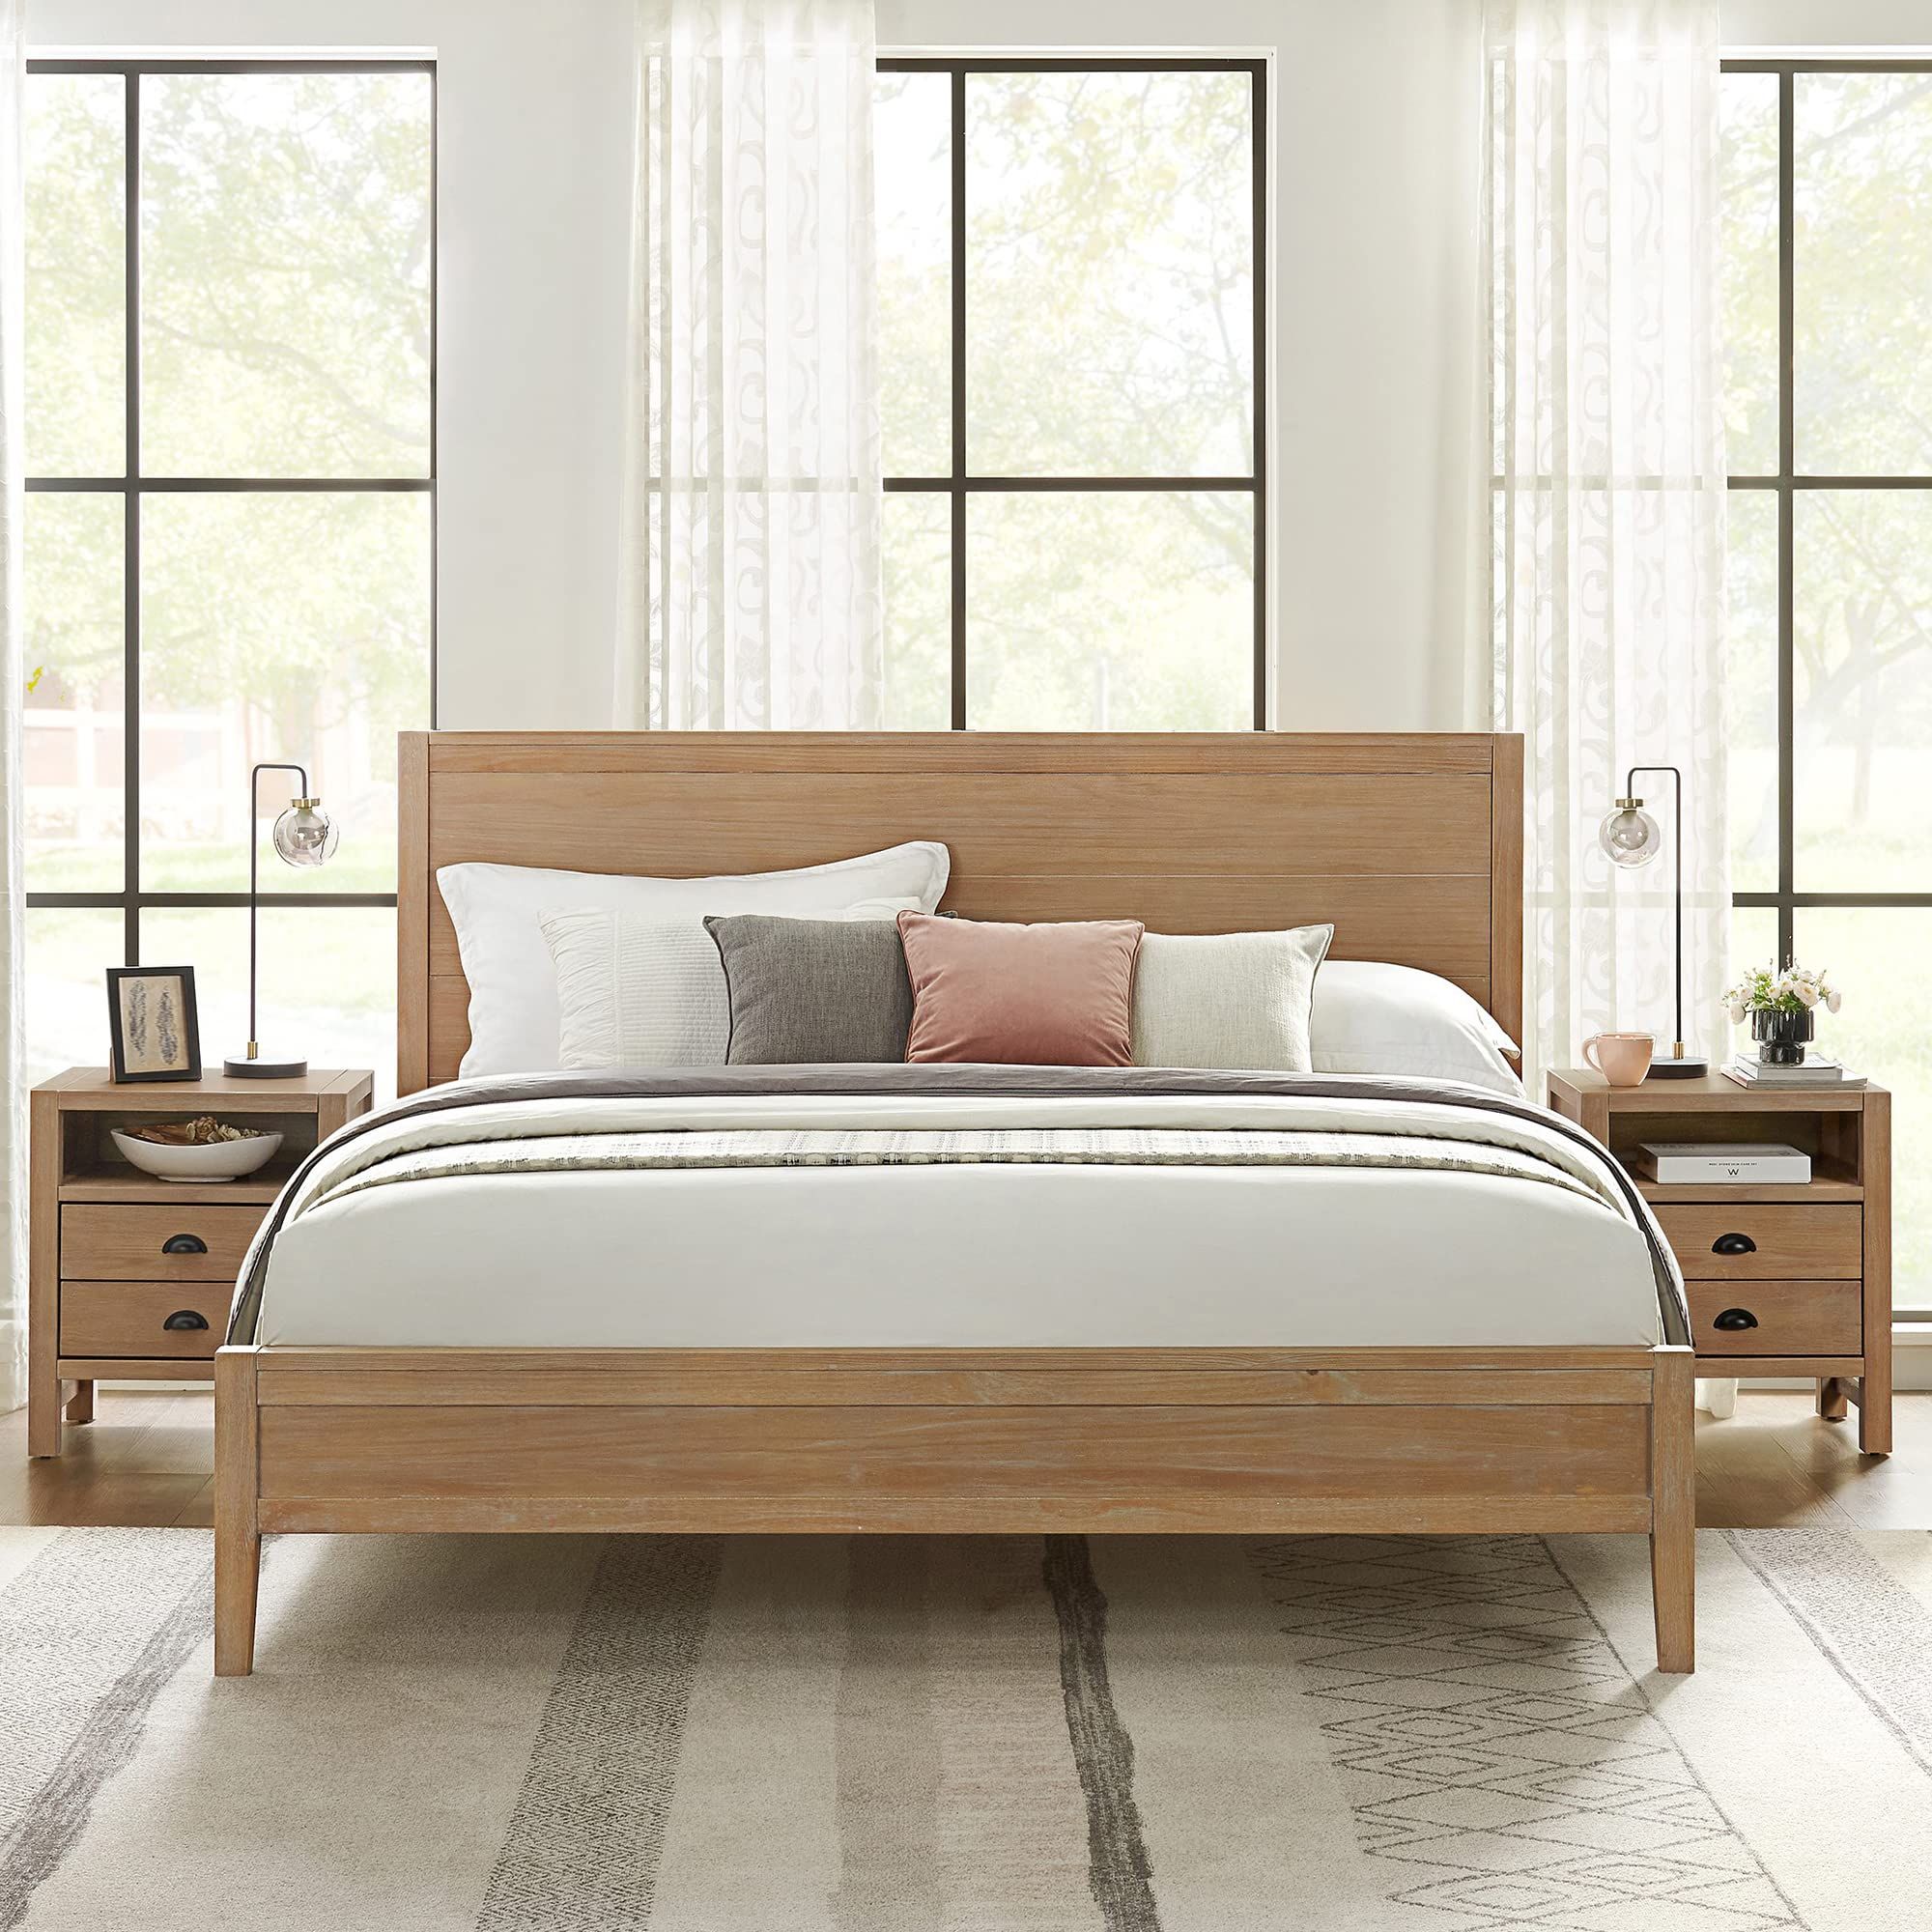 Elevate Your Space with Contemporary King
Bedroom Sets